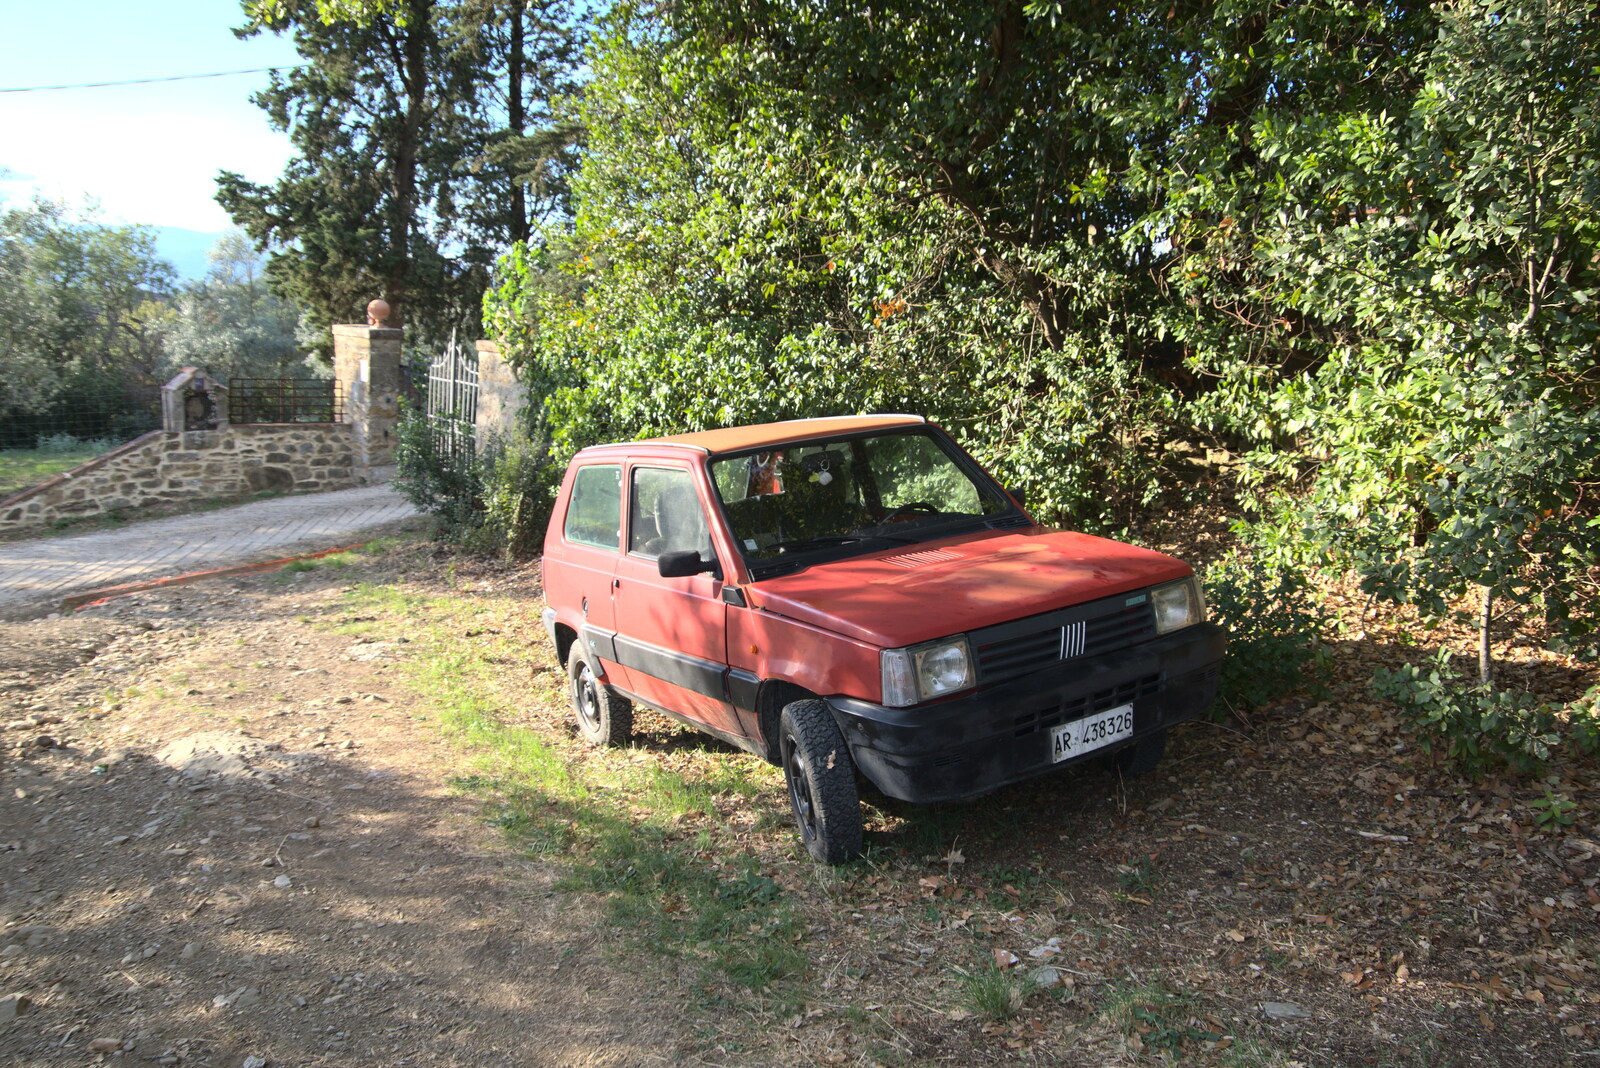 A Day by the Pool and a Festival Rehearsal, Arezzo, Italy - 3rd September 2022: There's a proper old Fiat Panda at the start